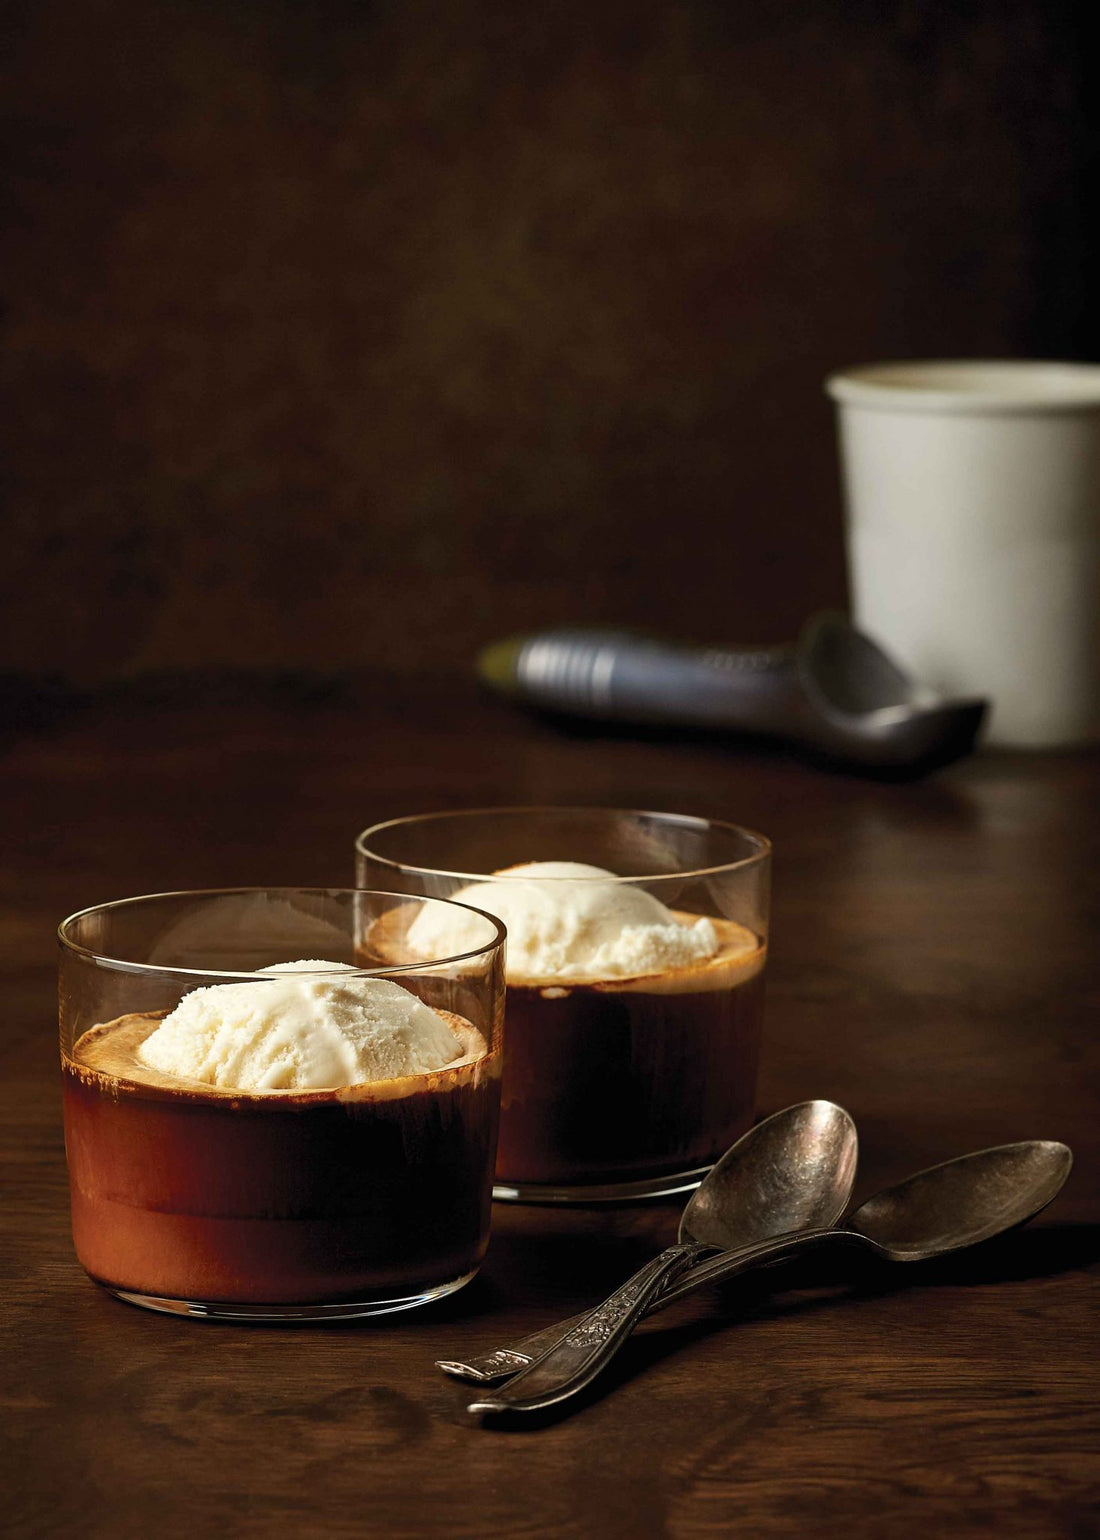 How to make an Affogato at home